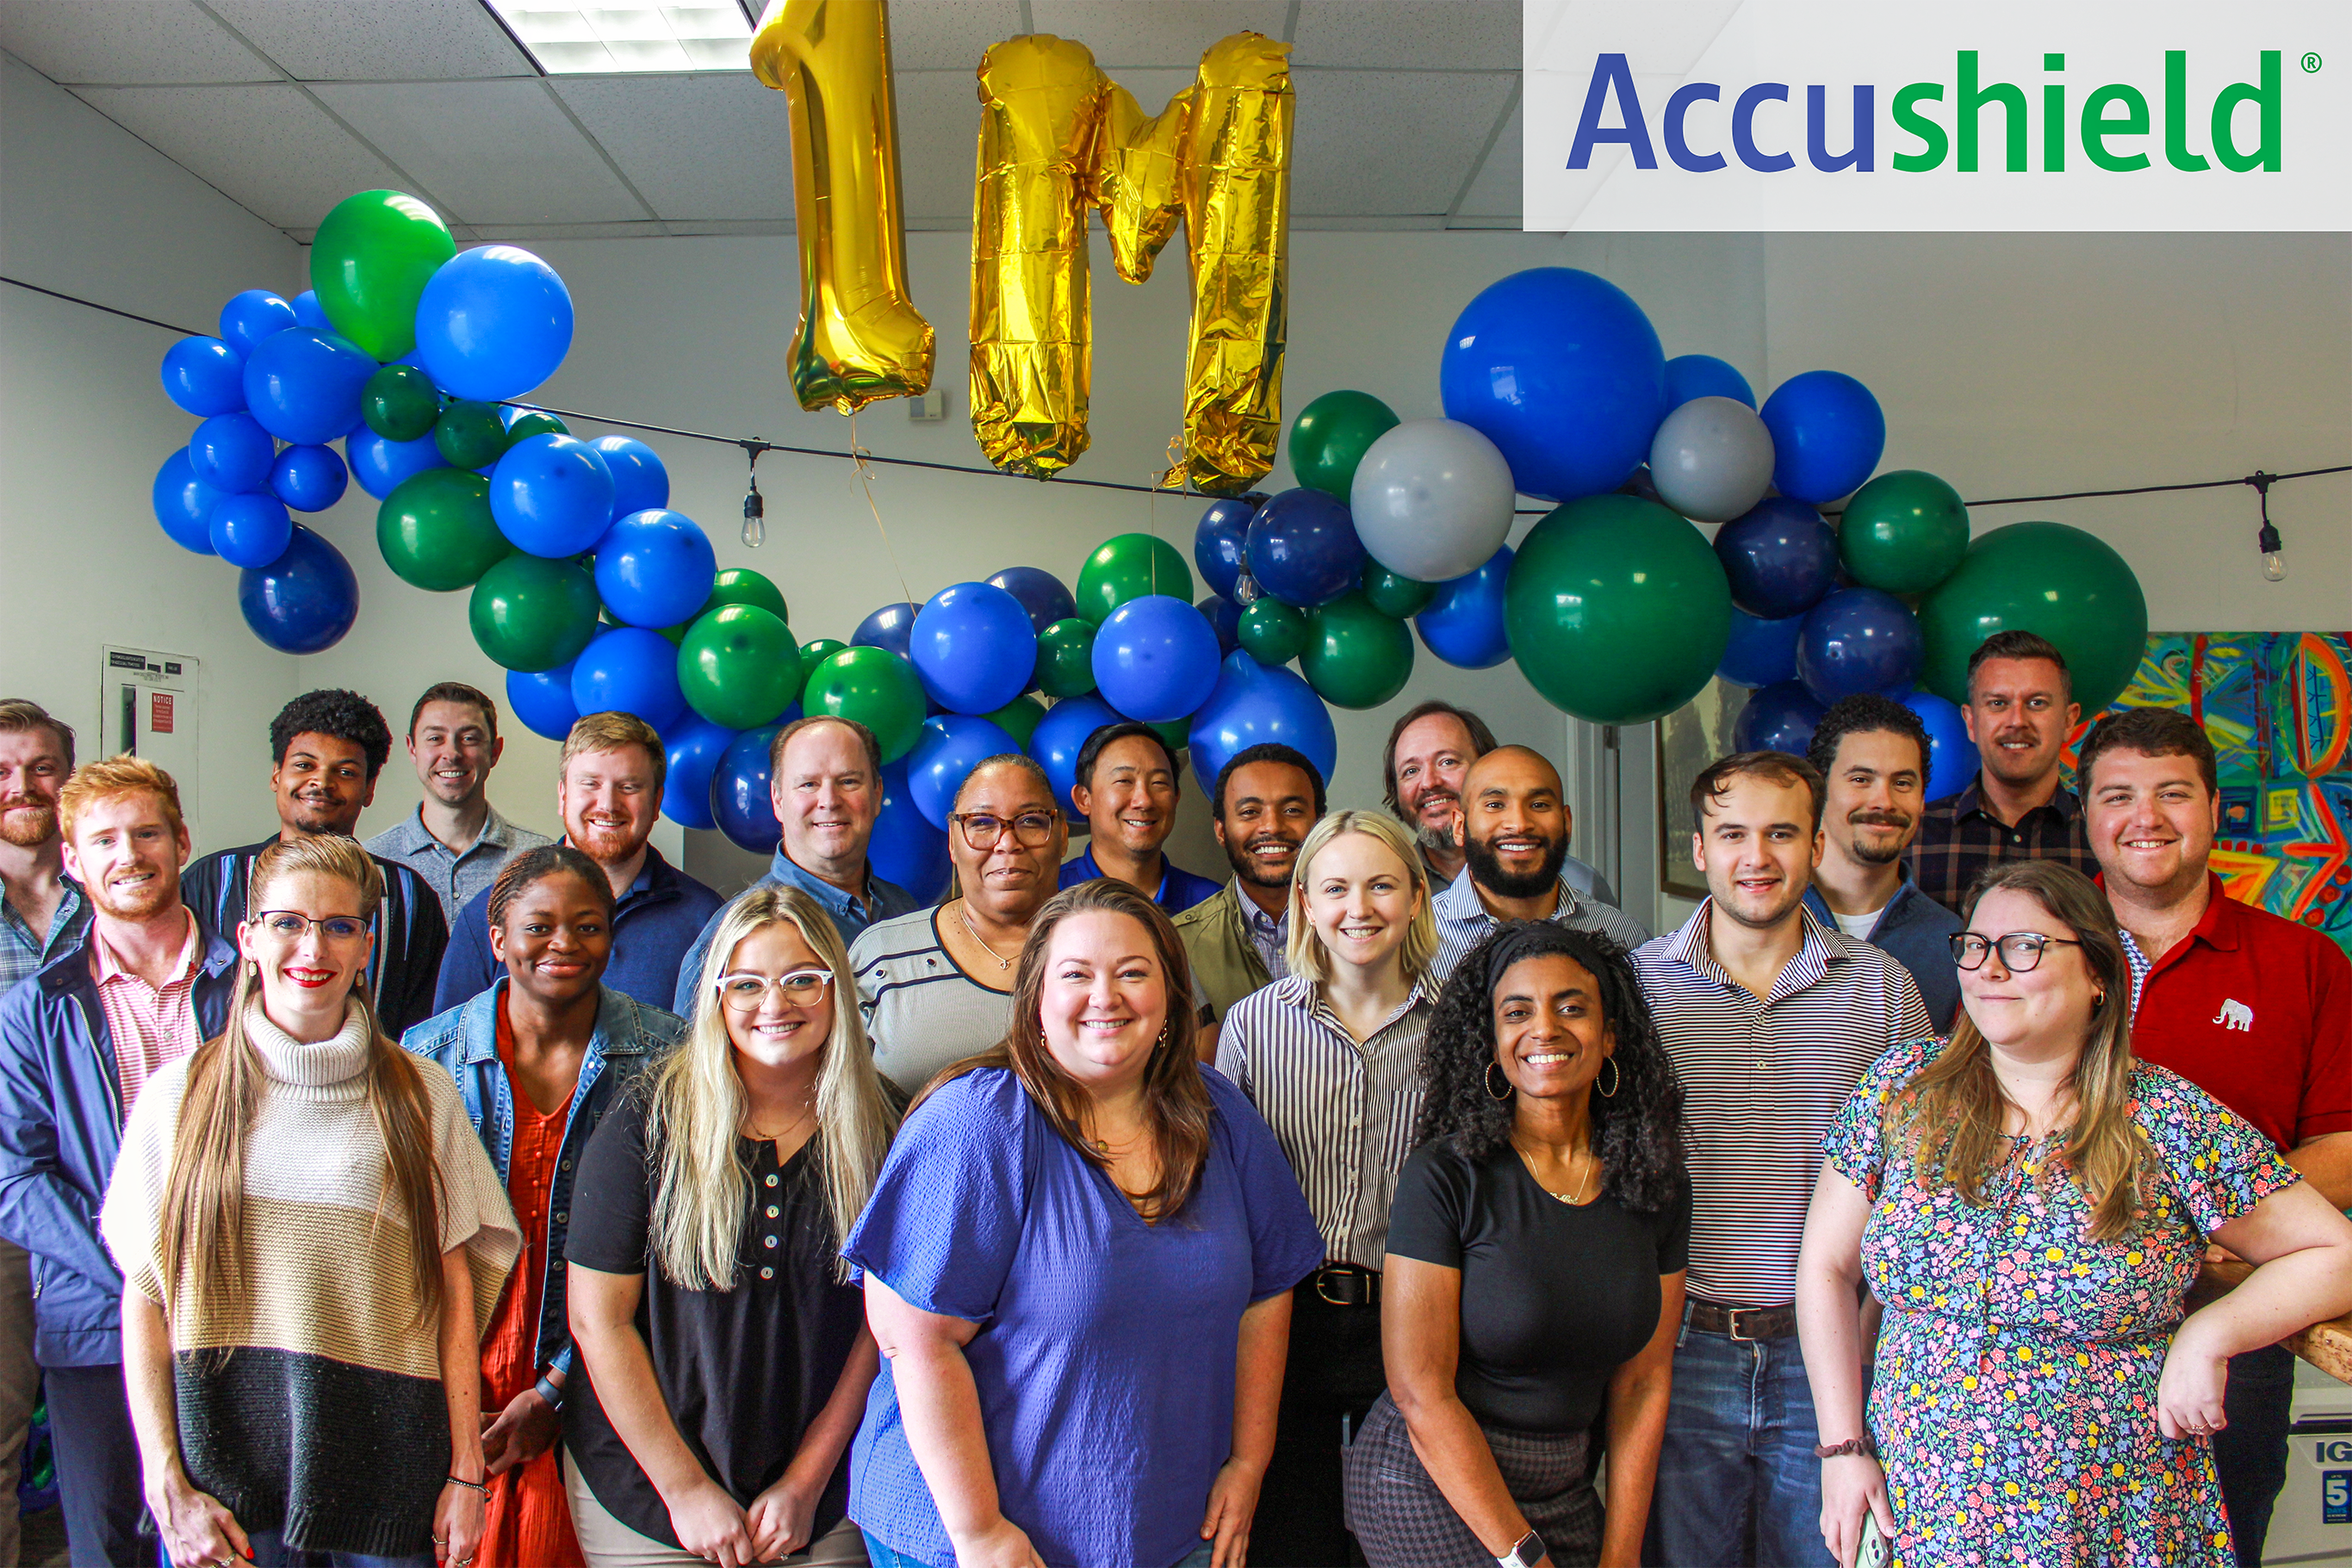 Accushield Reputation Accelerator One Million Ratings office party